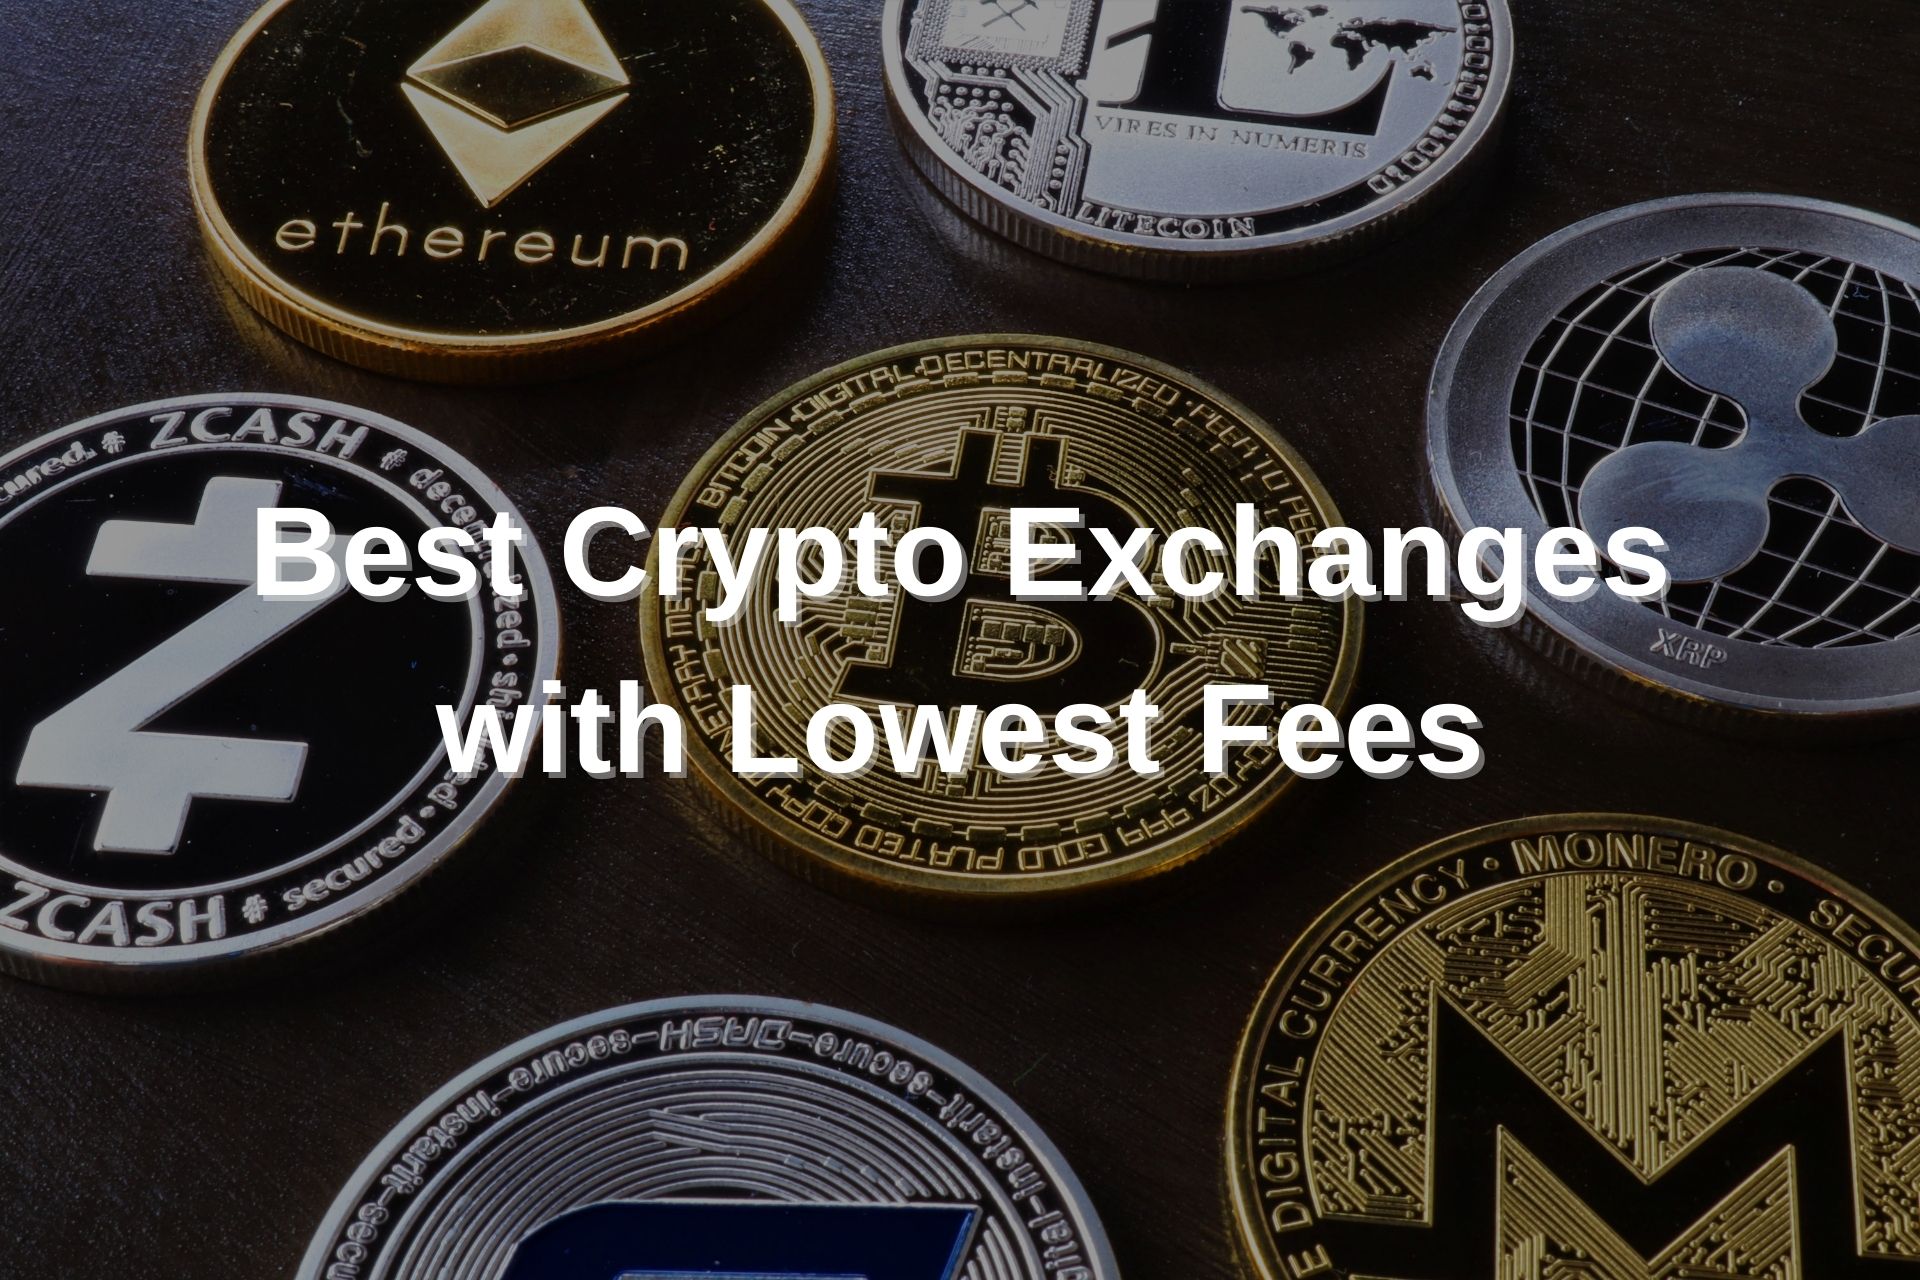 Best Crypto Exchanges with Lowest Fees